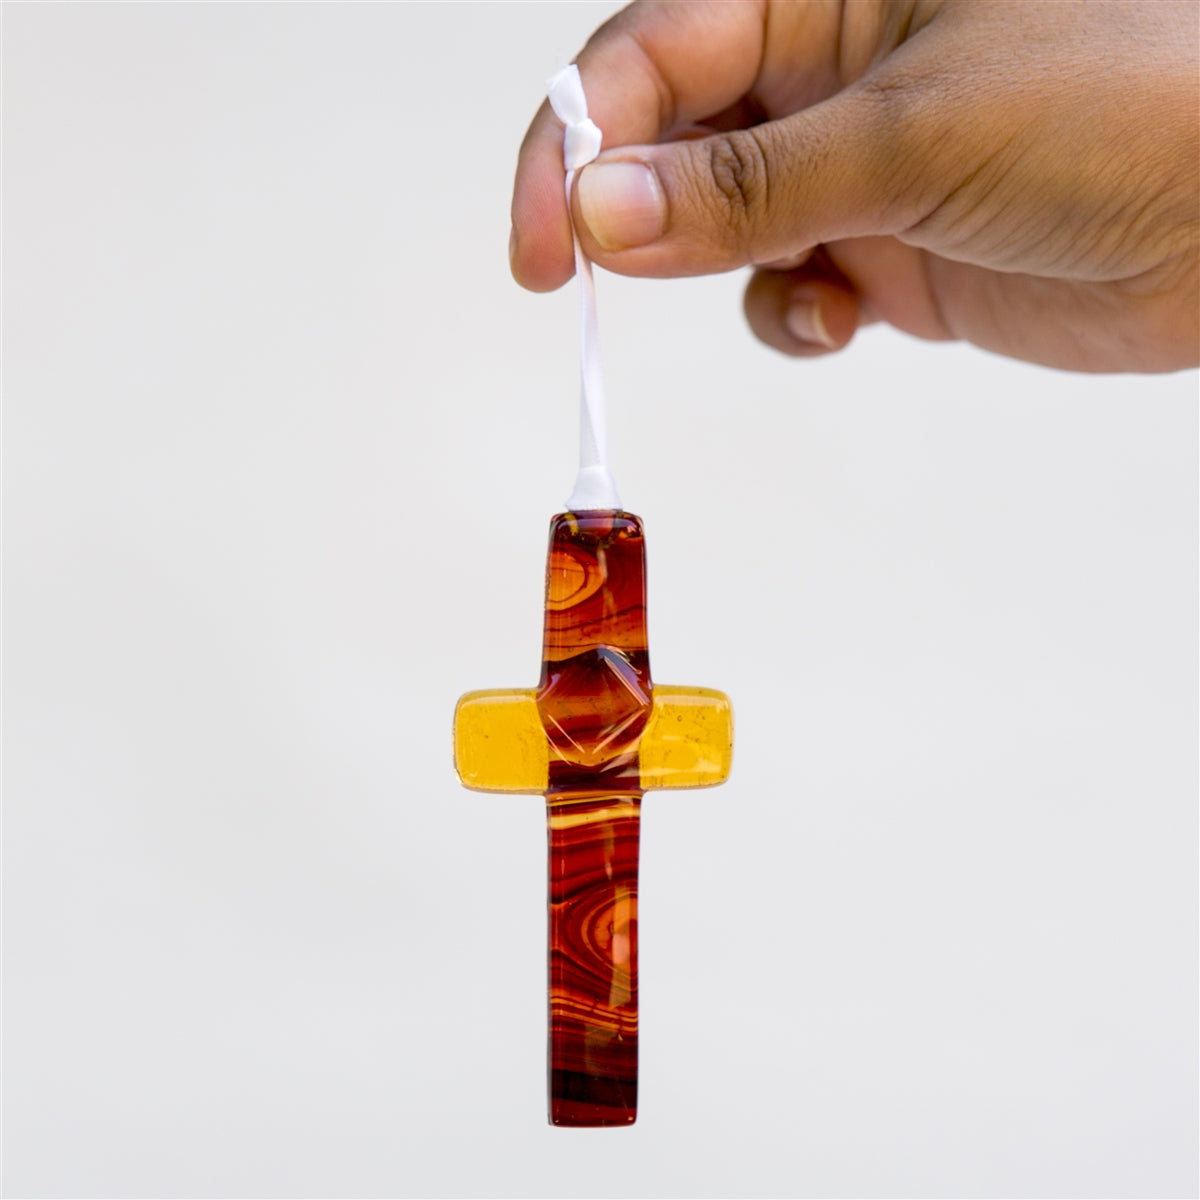 Glass cross being held with the light shining through to show the swirls of amber and brown in the glass